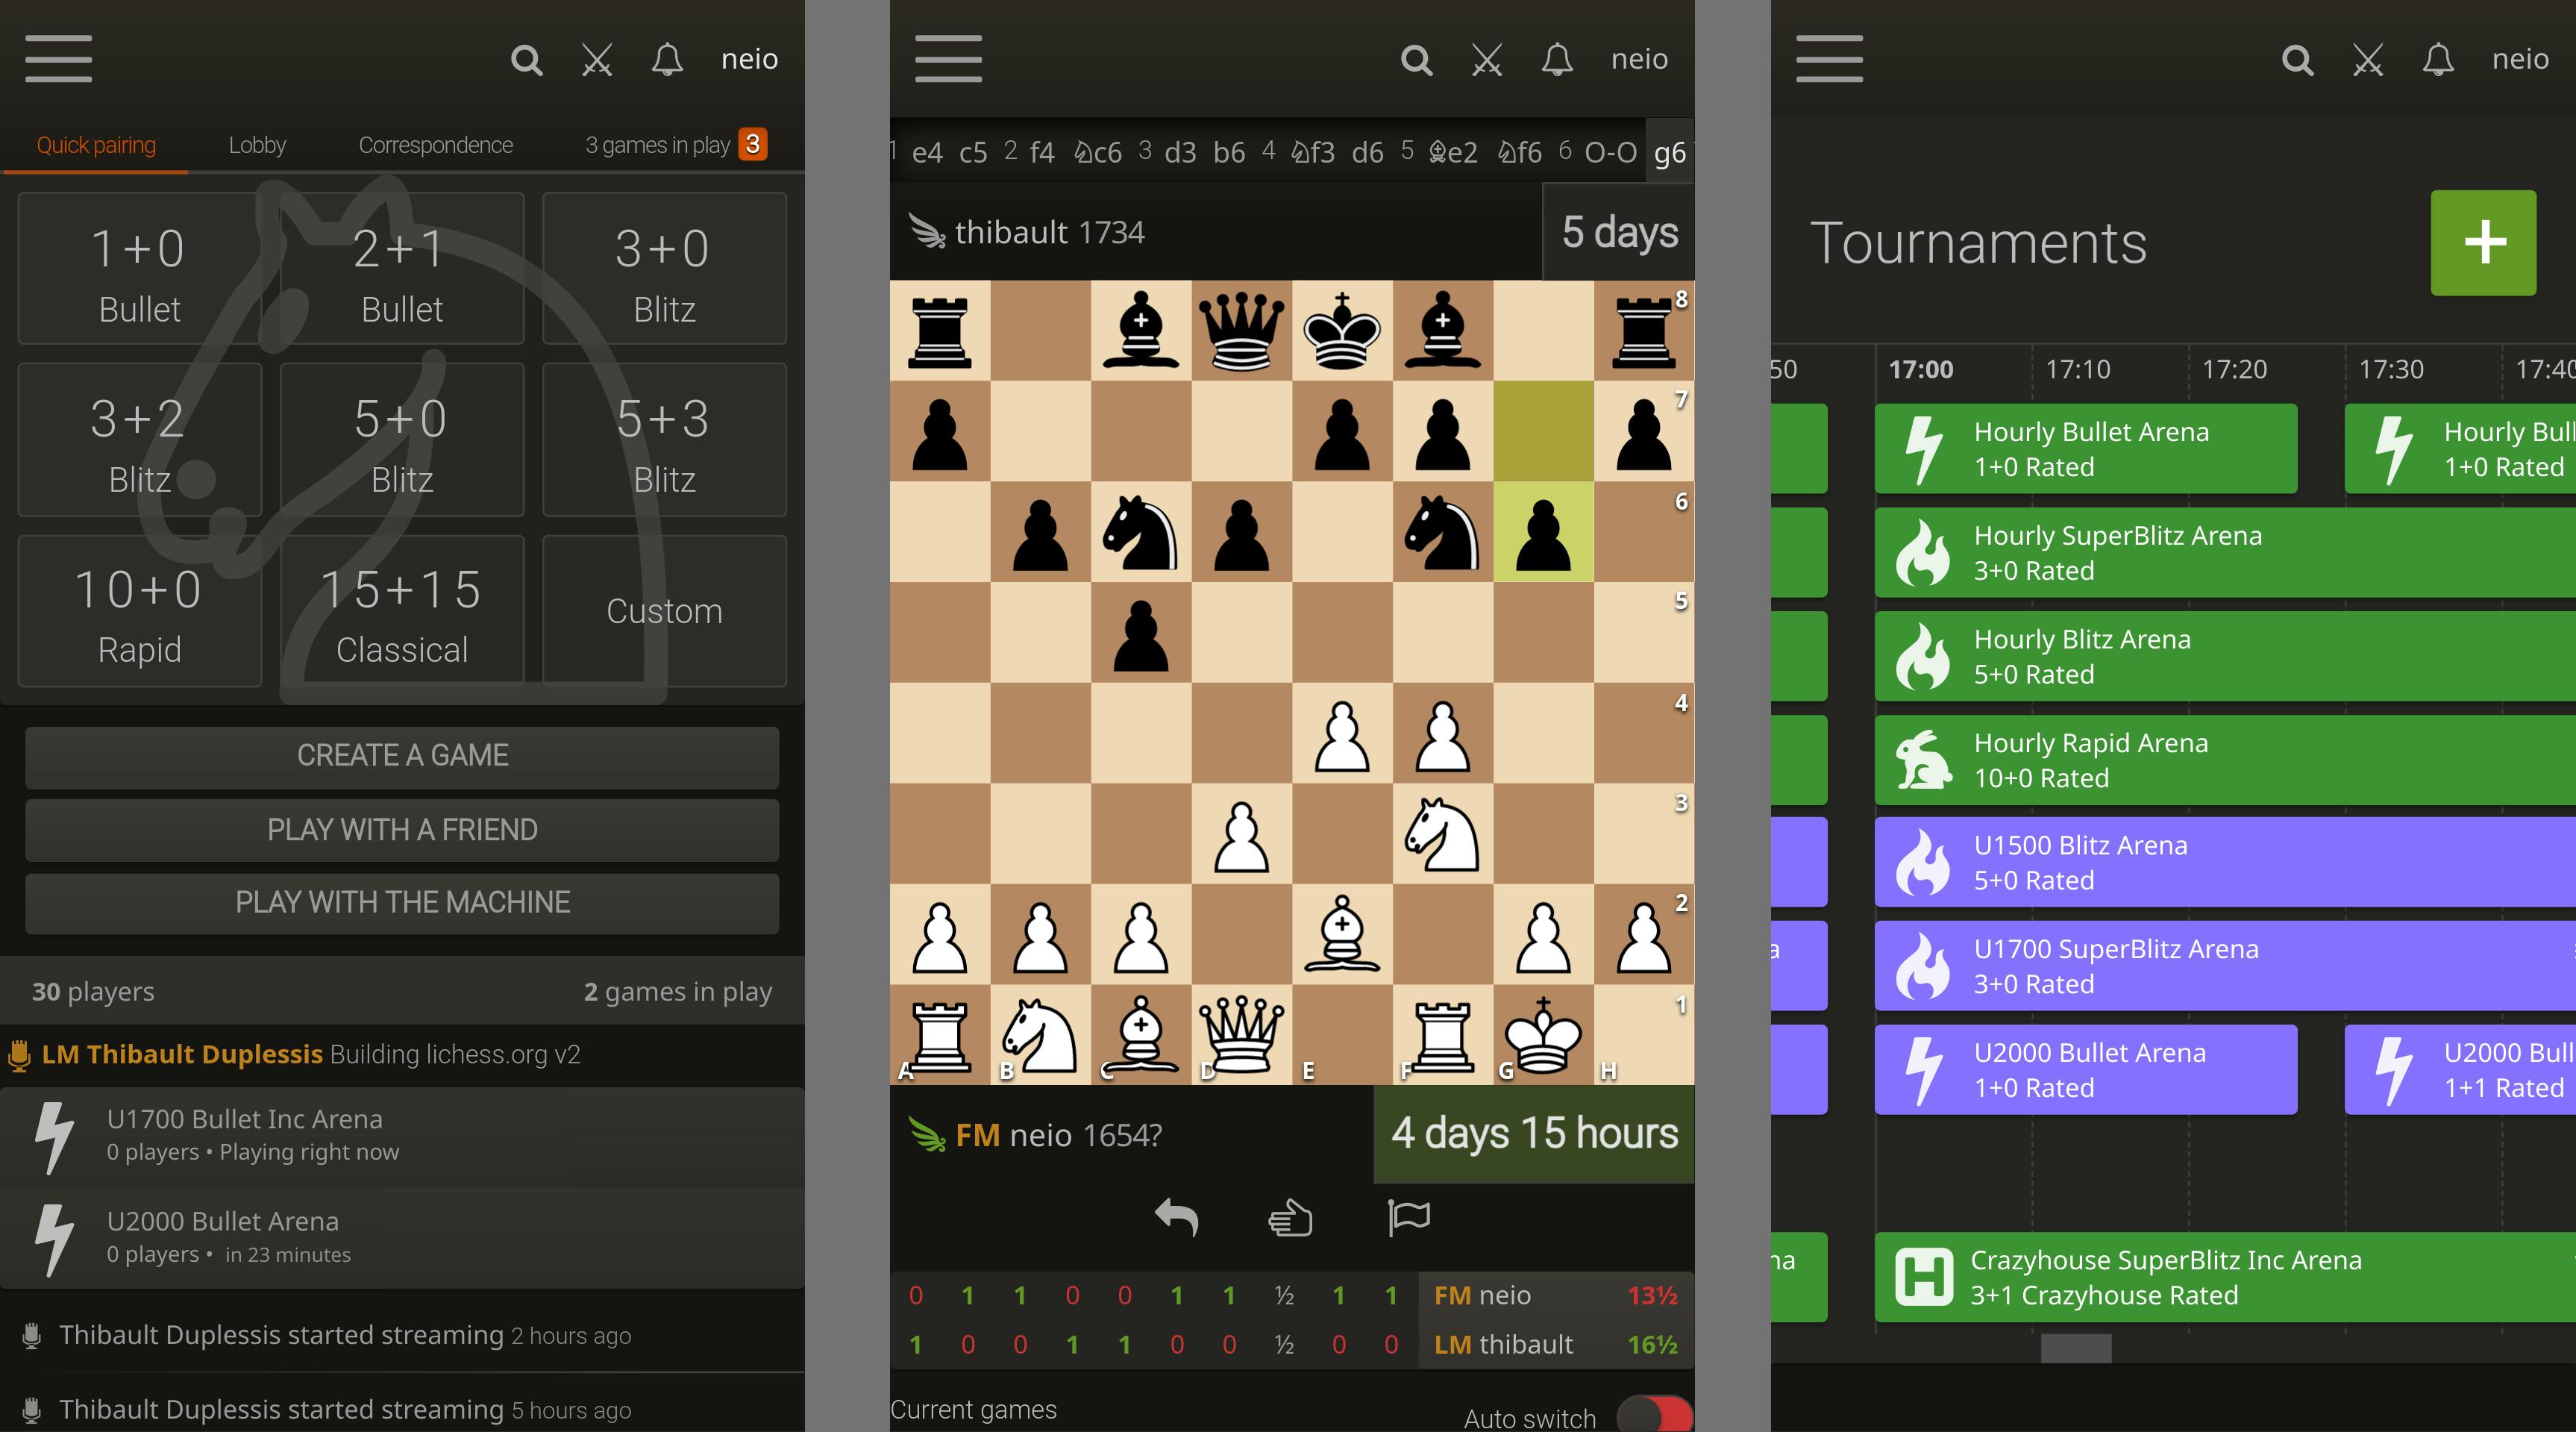 lichess.org - We just crossed 100,000 online users on